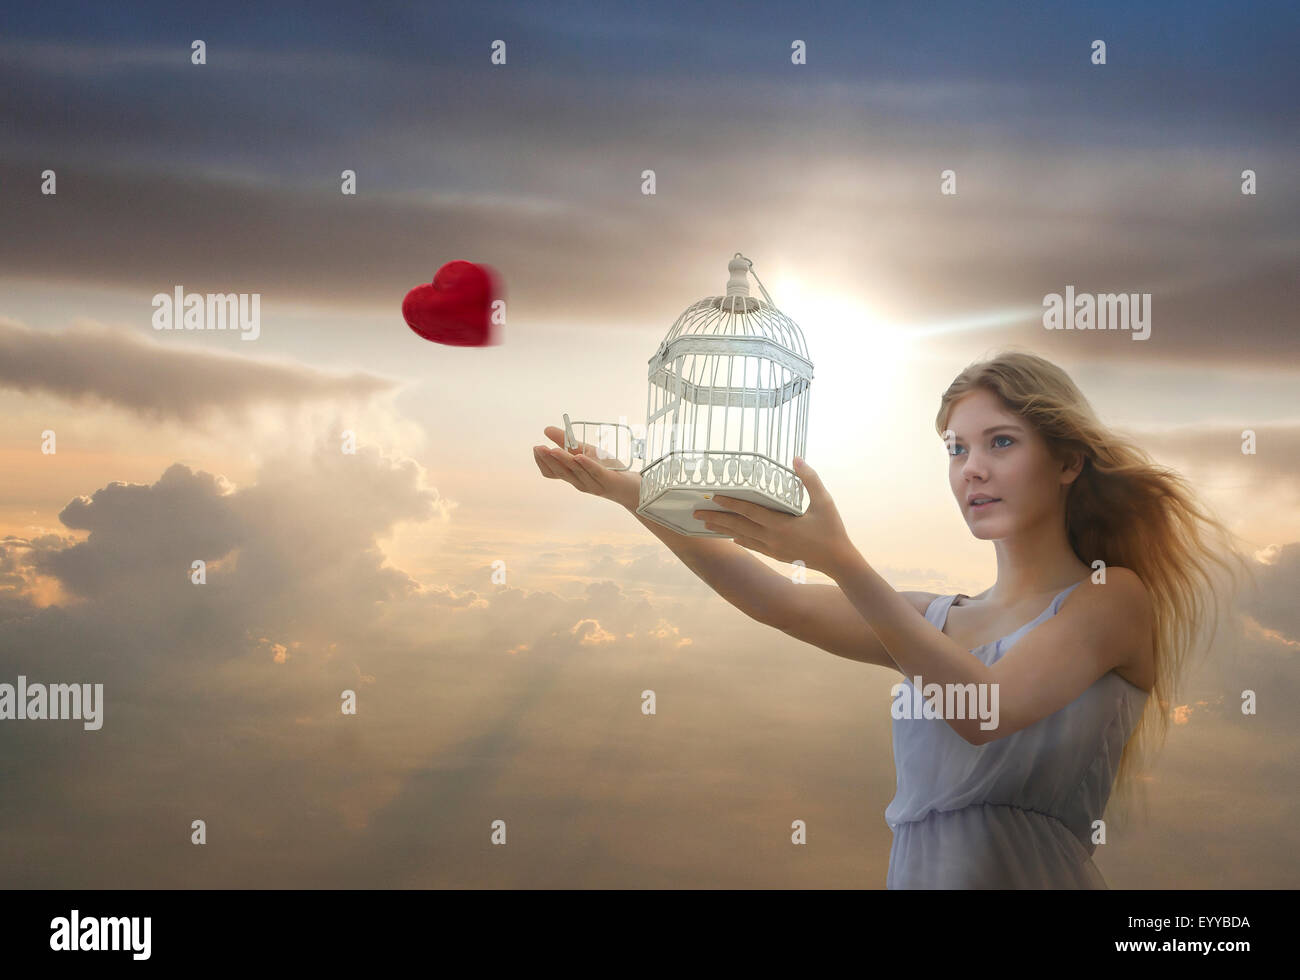 Caucasian woman releasing heart from birdcage Stock Photo